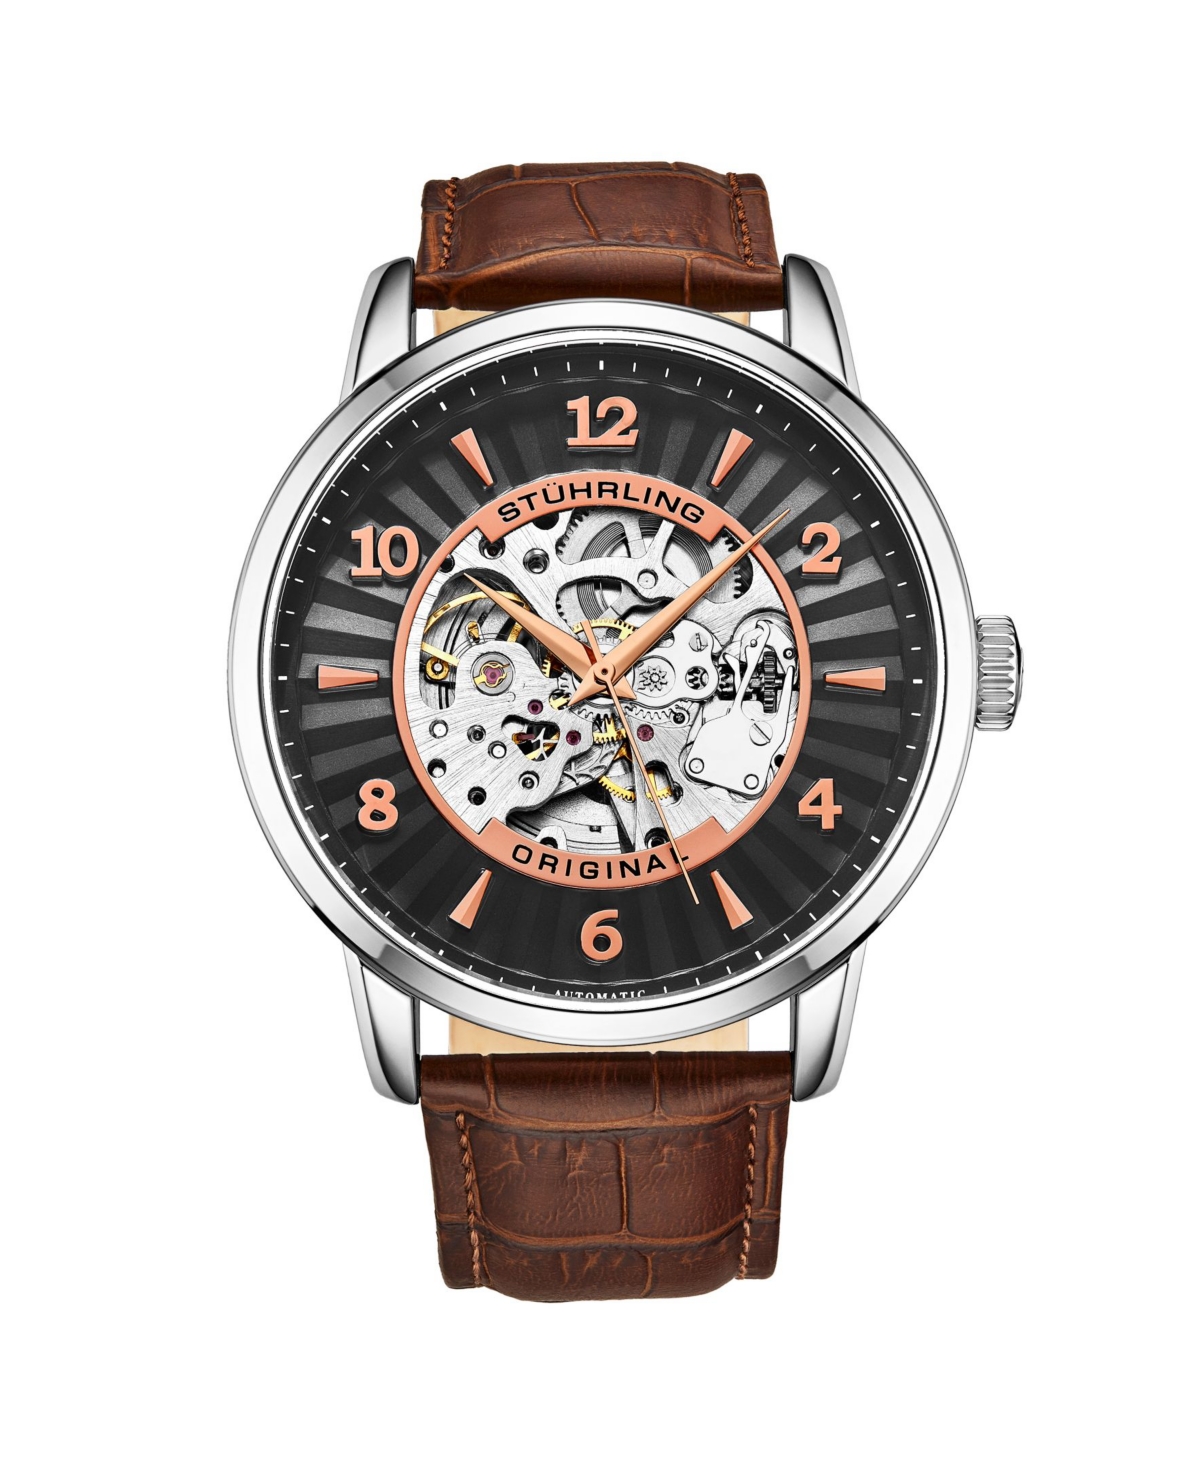 Men's Brown Leather Strap Watch 48mm - Brown